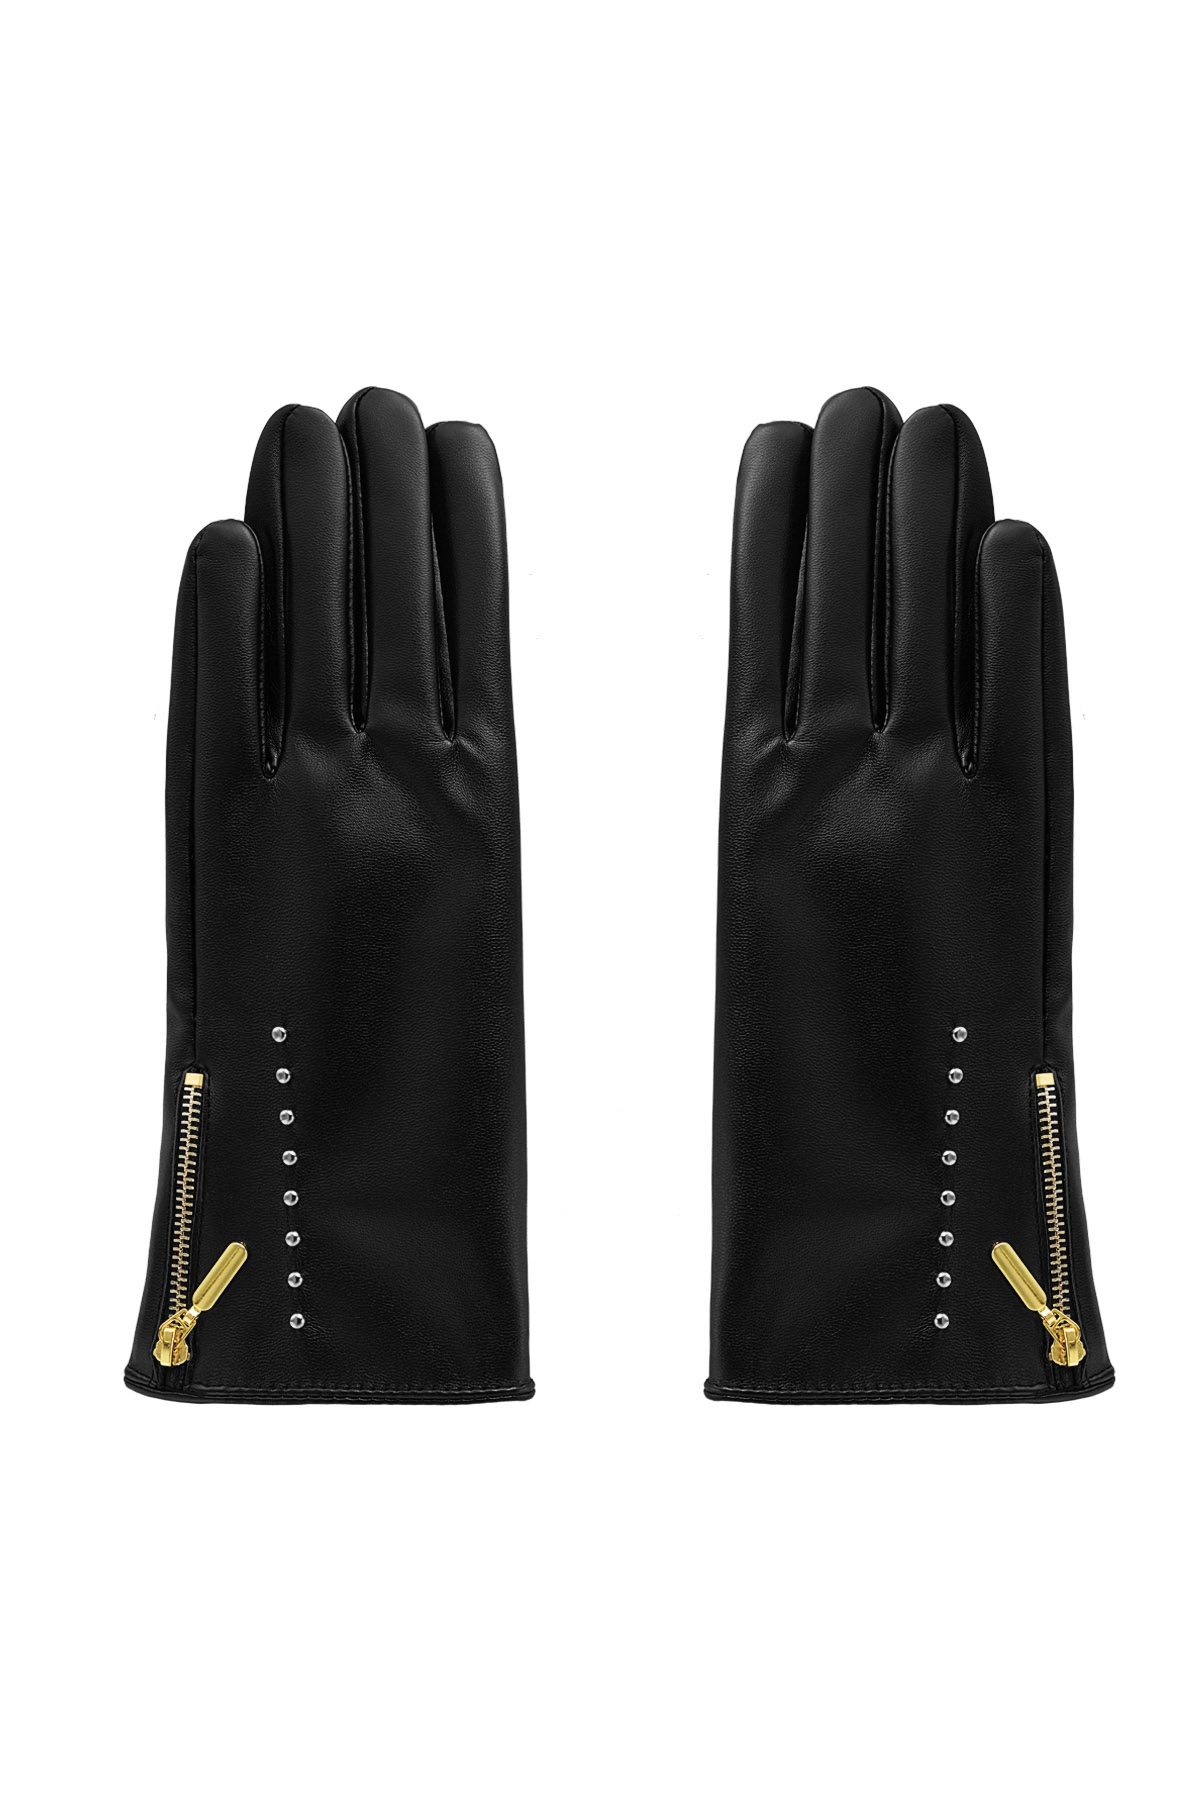 PU gloves with studs and zipper - black